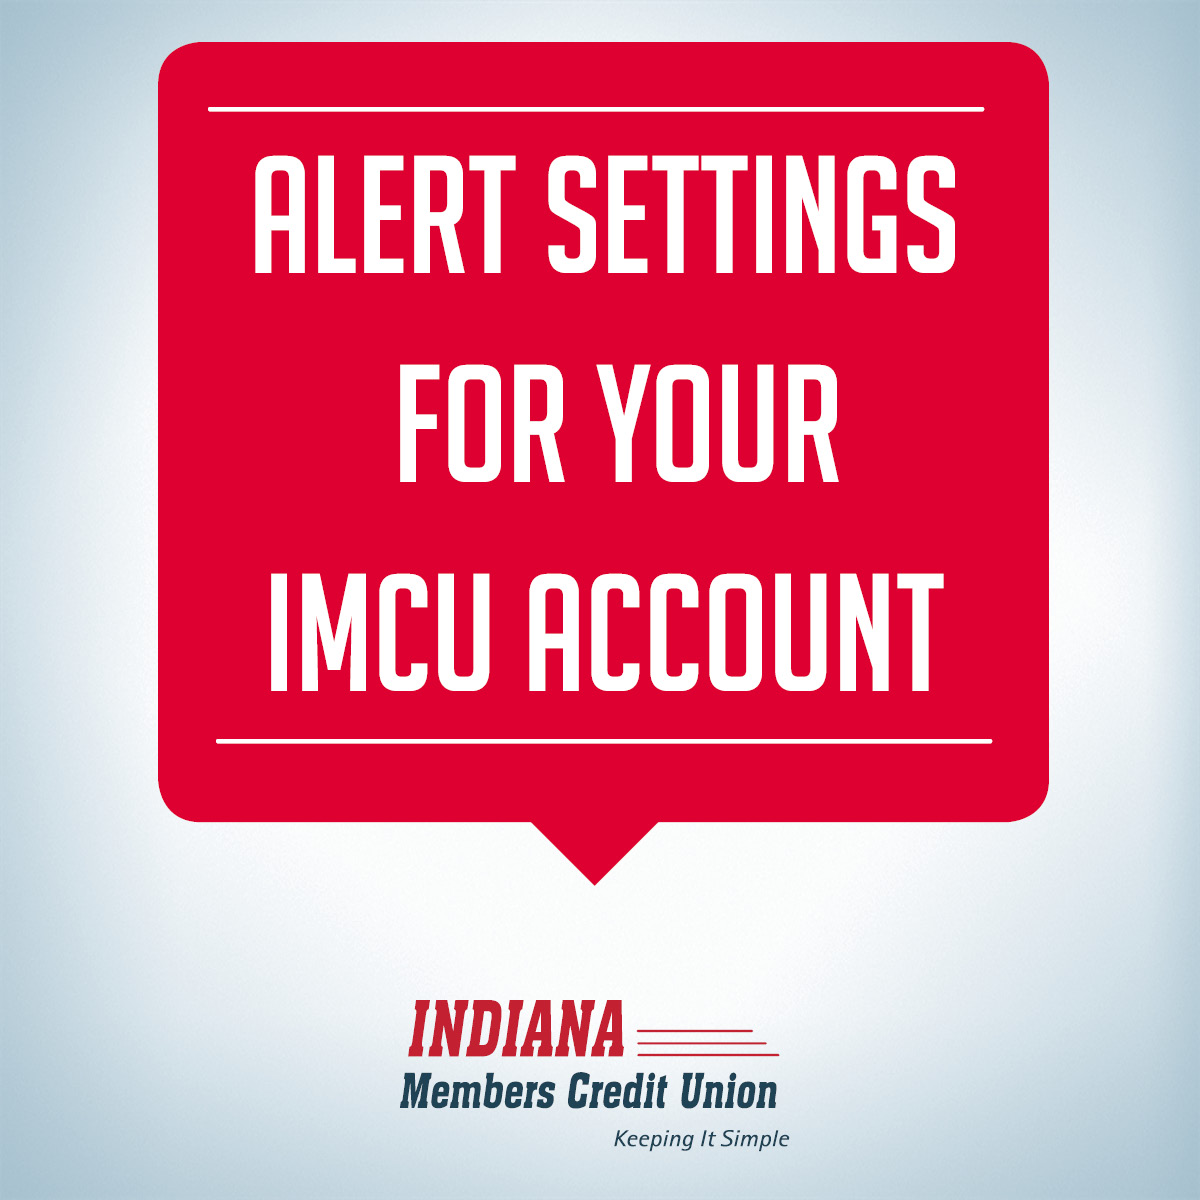 Did you know IMCU offers alert settings for your accounts to help ...